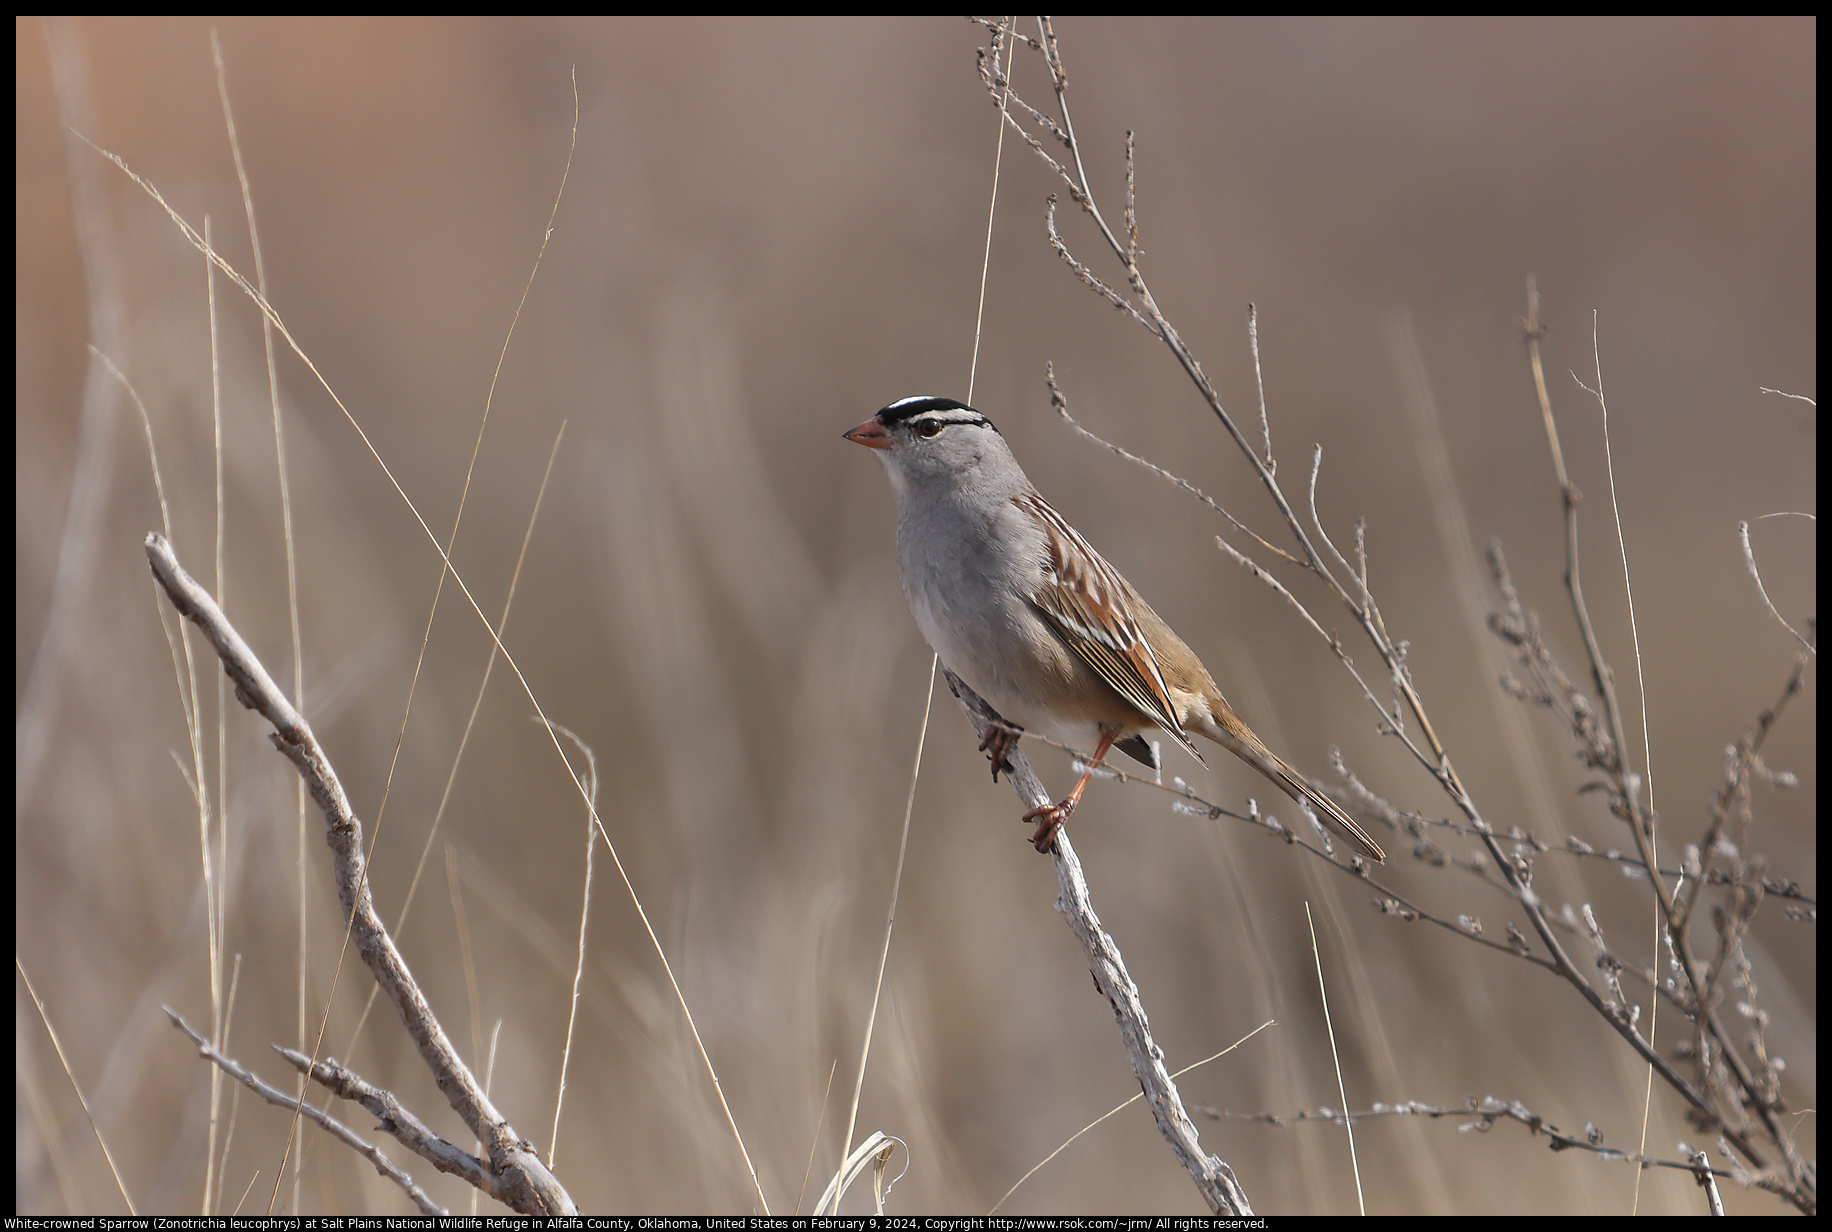 White-crowned Sparrow (Zonotrichia leucophrys) at Salt Plains National Wildlife Refuge in Alfalfa County, Oklahoma, United States on February 9, 2024